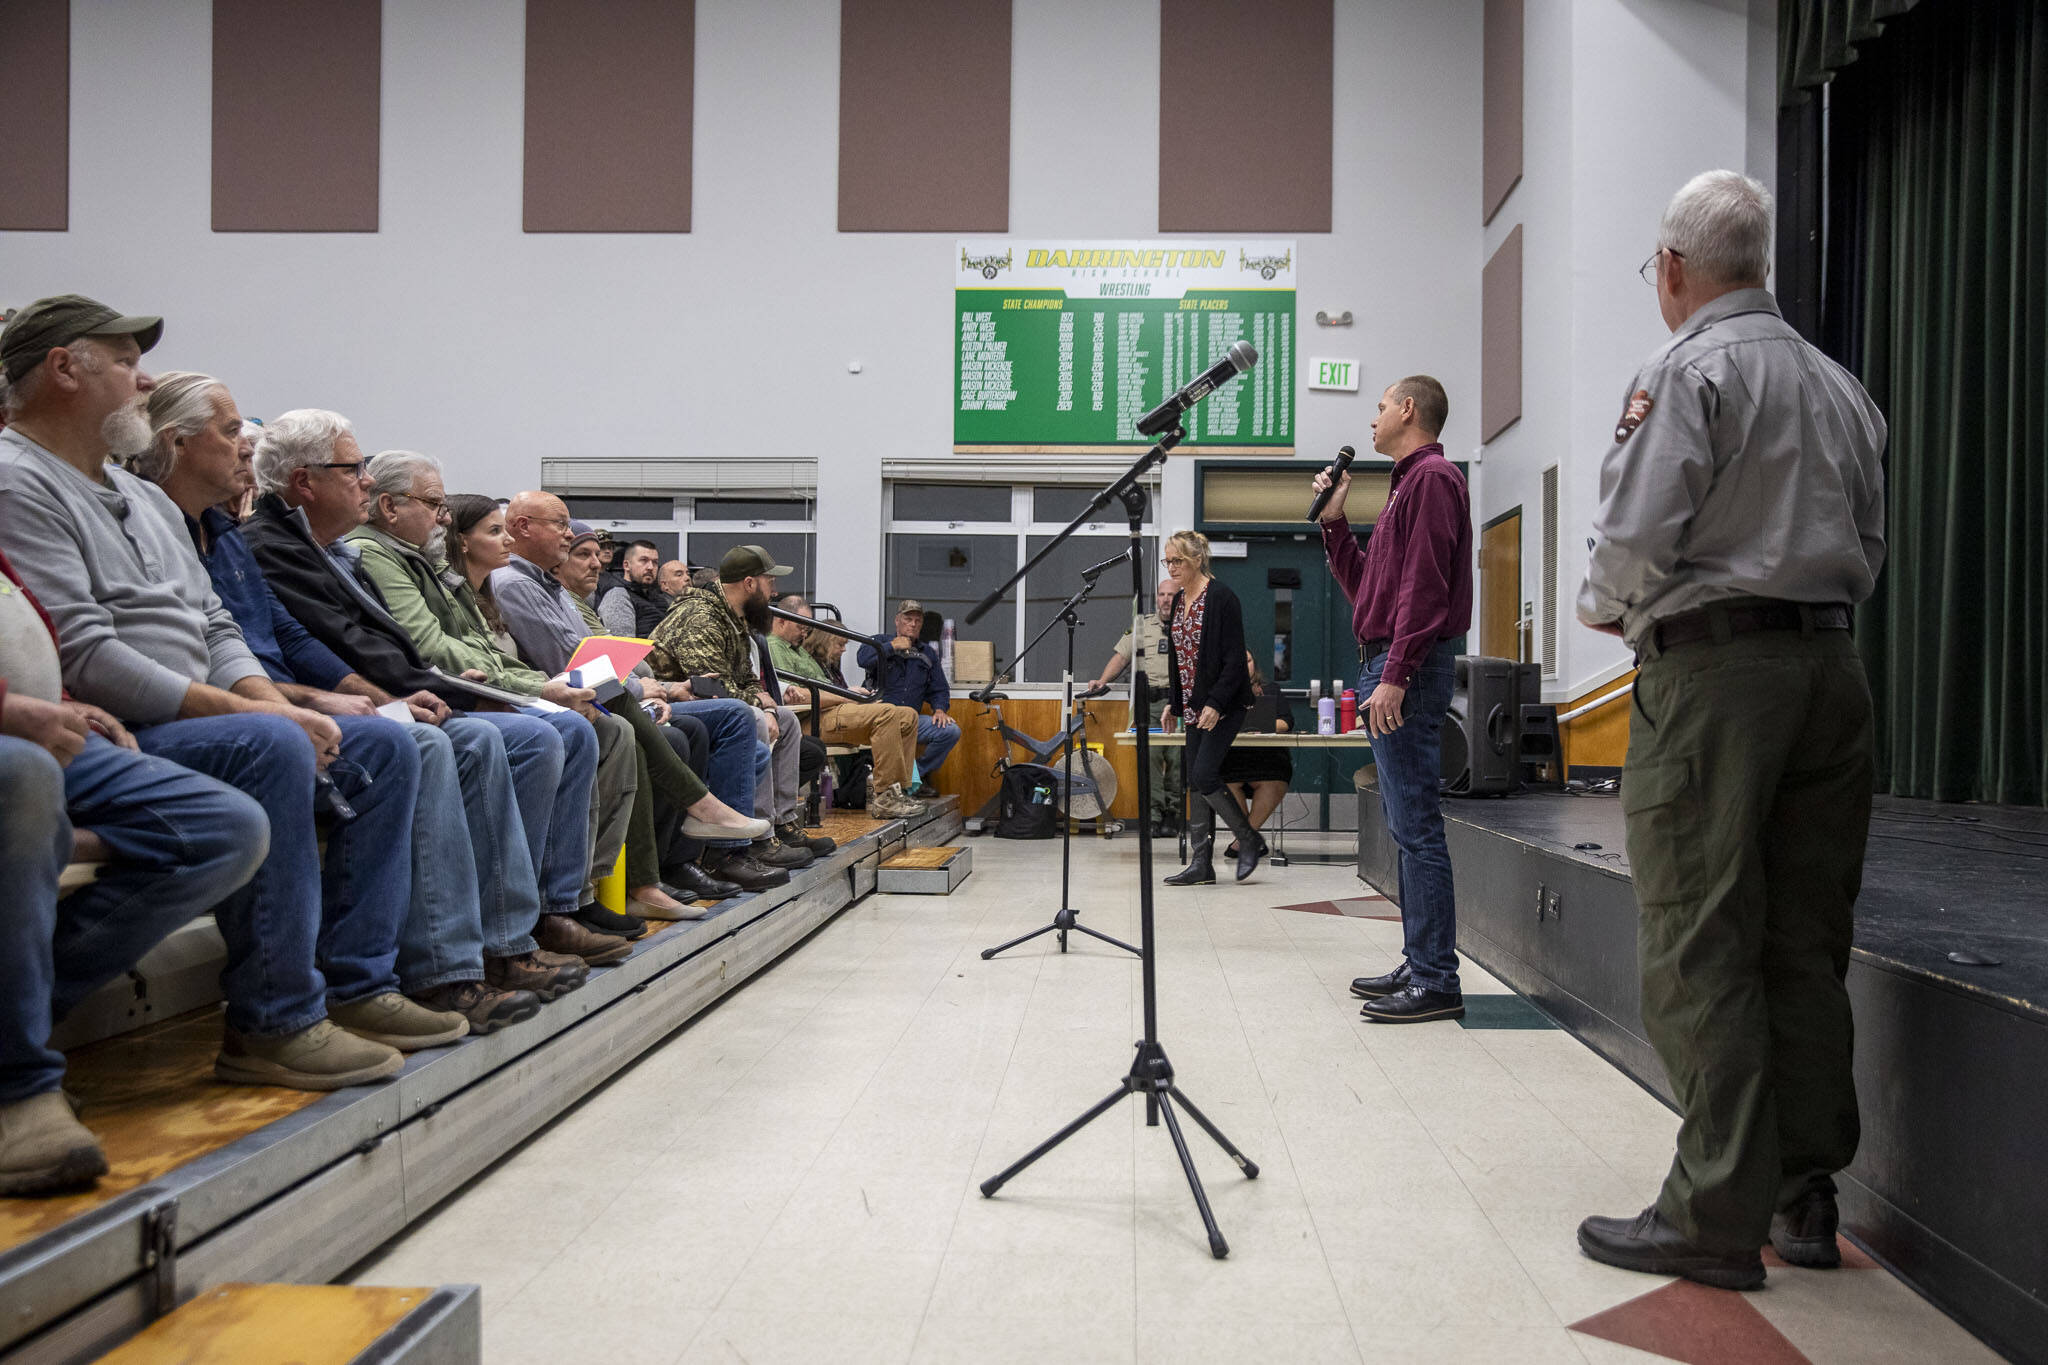 U.S. Fish and Wildlife Service State Supervisor Brad Thompson speaks during a meeting for public comment on the topic of bringing grizzly bears to the North Cascades at Darrington High School Auditorium in Darrington, Washington on Thursday, Nov. 2, 2023. (Annie Barker / The Herald)